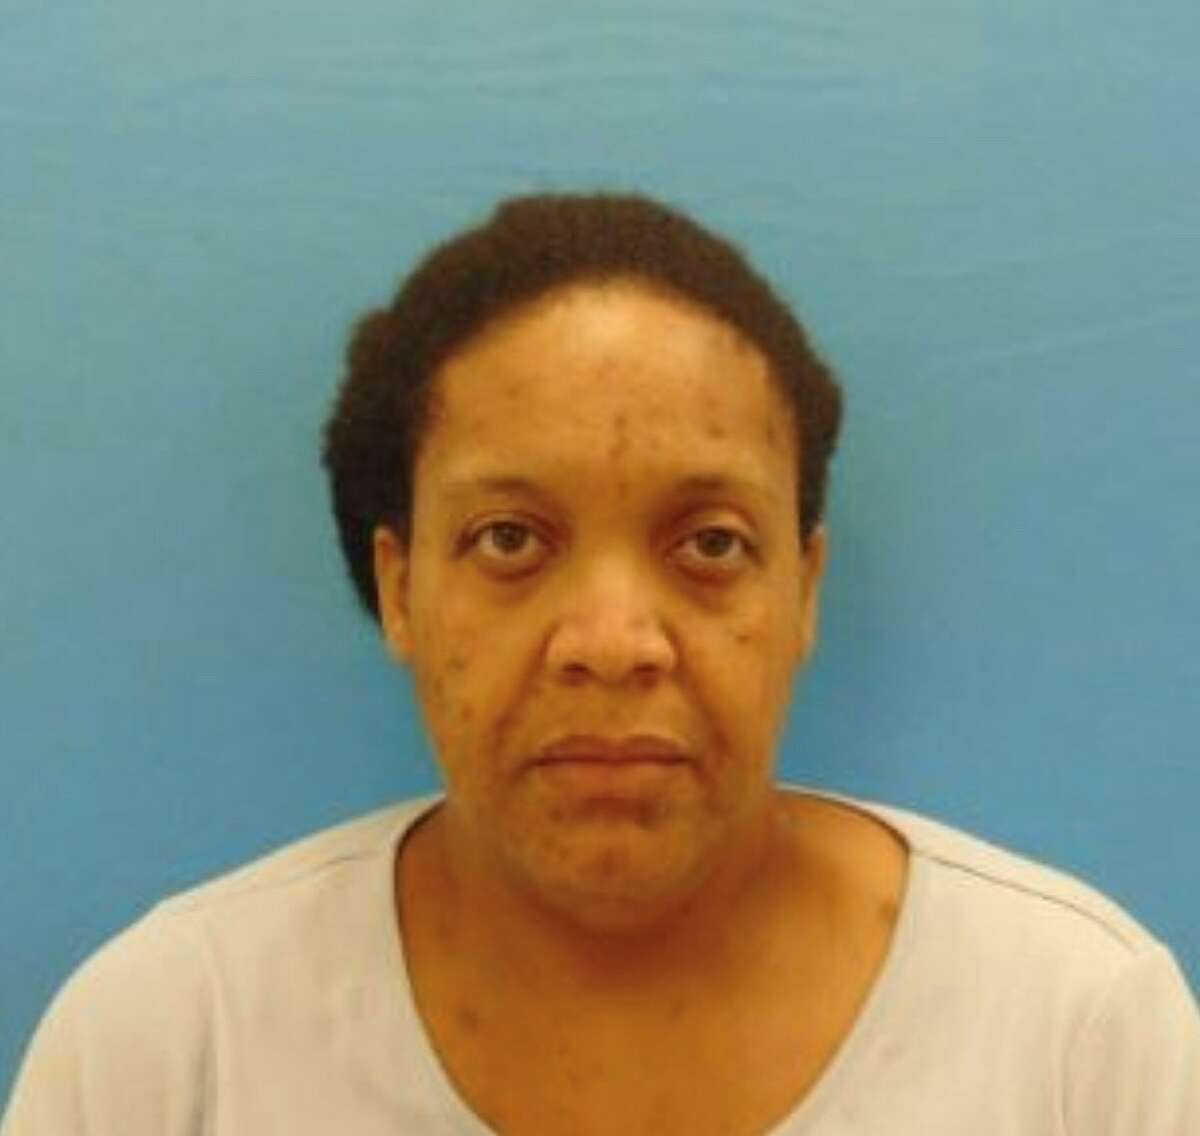 Former Seguin dispatcher Delissa Navonne Crayton, 47, was arrested on Wednesday, July 10, after the remains were found. The woman lived in the home with the remains of her mother in plain sight for three years, police said. The woman's teenage daughter also lived in the home. Crayton was arrested for injury to a child under the age of 15.Read more: Police: Seguin woman lived in home with mother's skeletal remains for three years